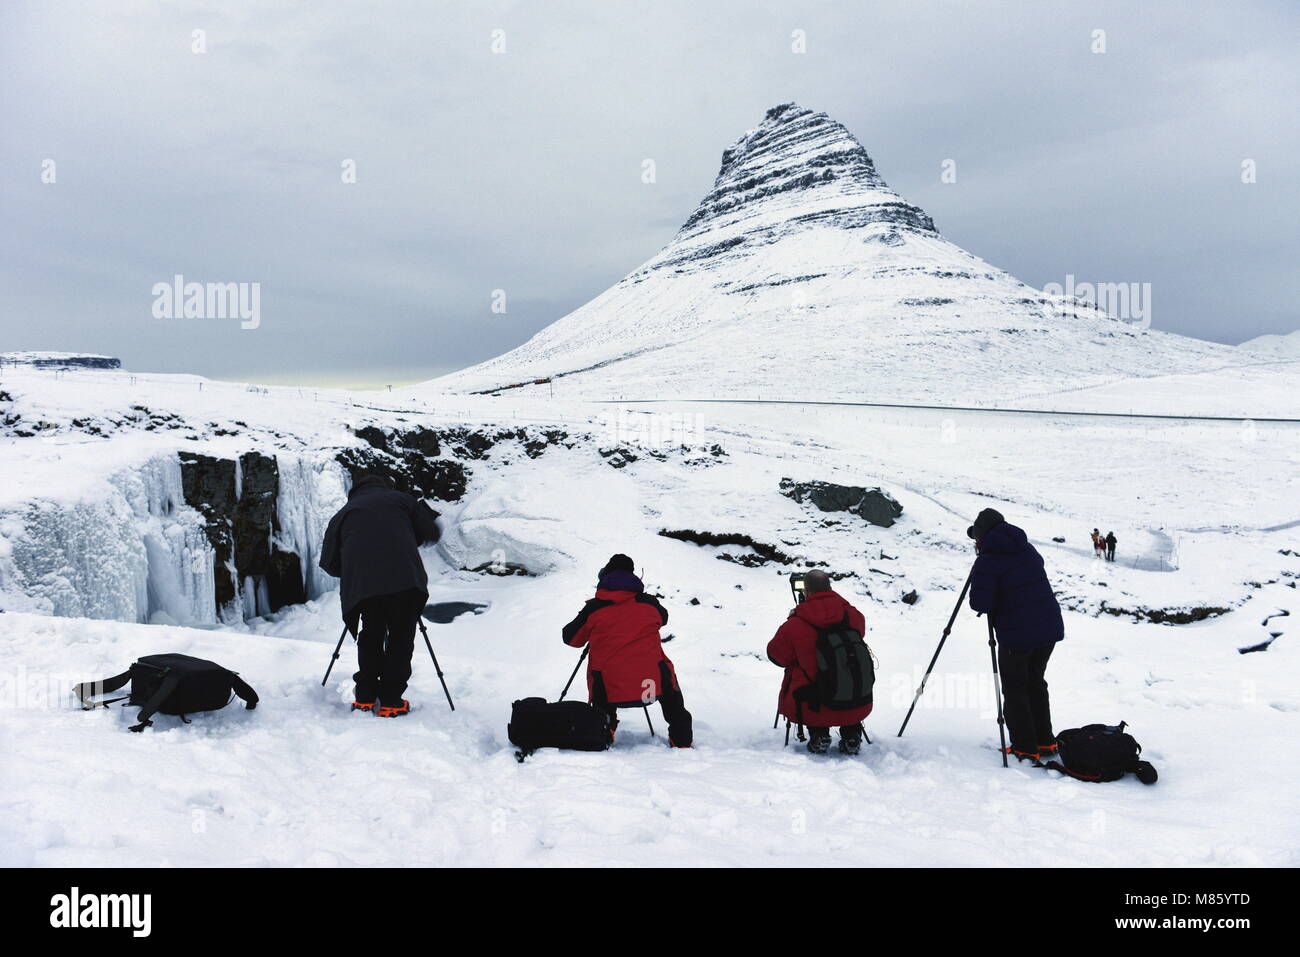 Grundarfjordur, Iceland. 14th March, 2018. Photographers line up to photograph Kirkjufell mountain in the snow. The mountain is famous for its similar appearance to the sorting hat in the Harry Potter films. The Icelandic government recently expressed concerns about the impact of tourism on the natural environment in Iceland. Credit: Glyn Thomas Photography/Alamy Live News Stock Photo